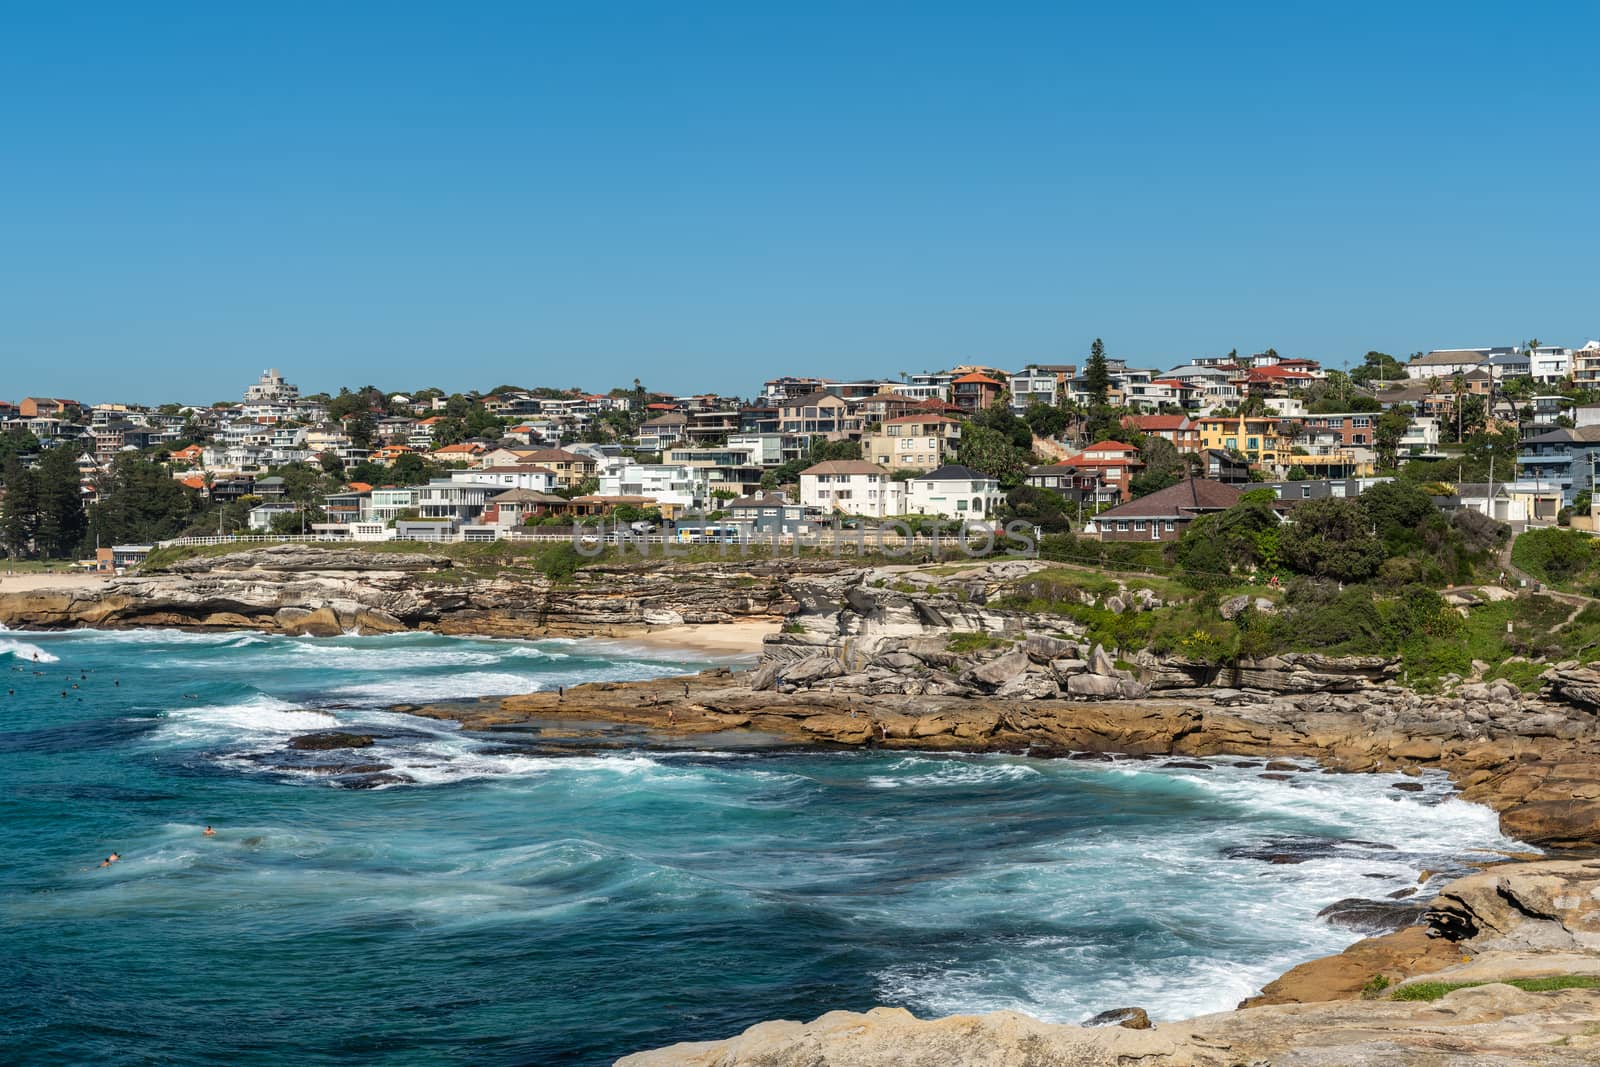 Sydney, Australia - February 11, 2019: Wide shot of Bronte and Tamarama beaches with neighborhoods above and rocks to the north. Blue sea and blue sky. Waves crashing on rocks.